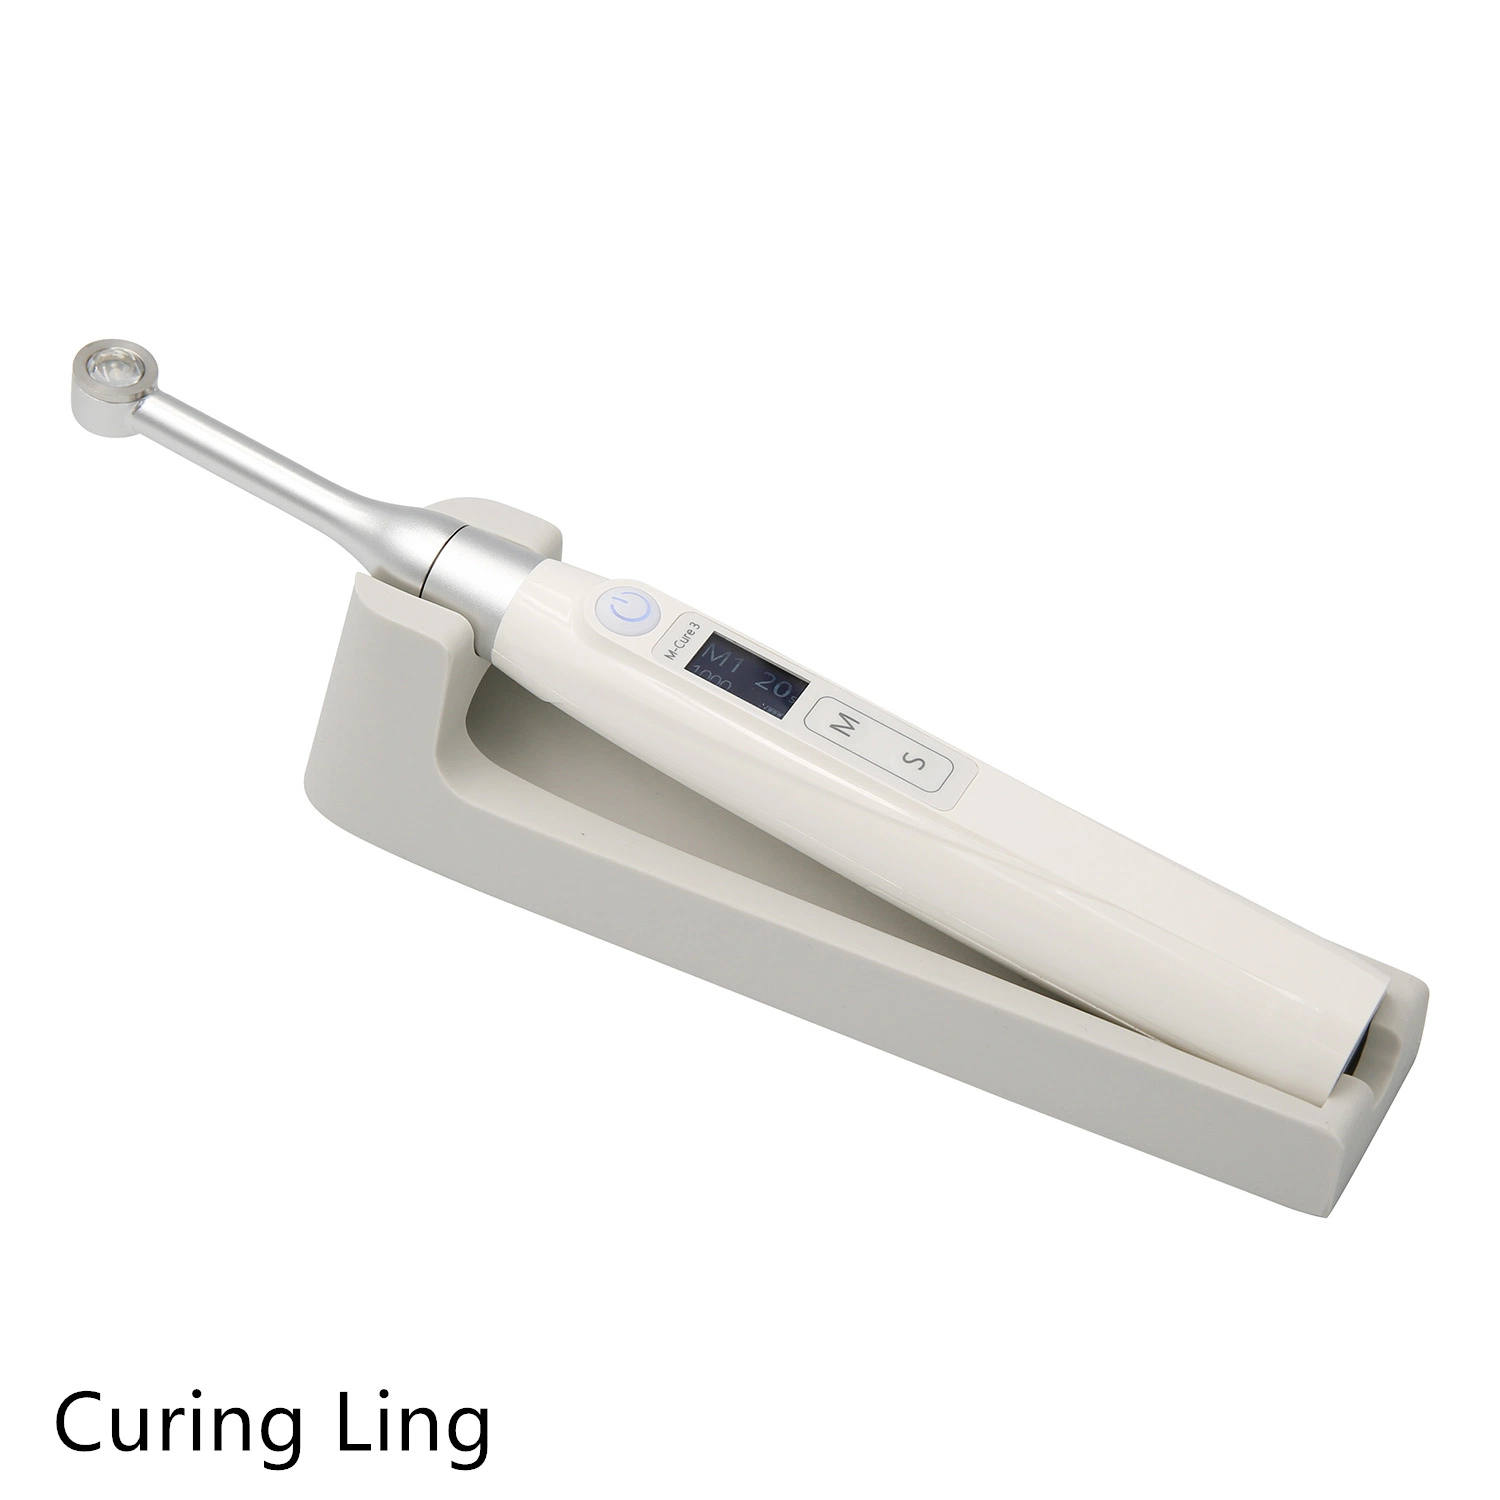 Cure 3 Portable Dental Laboratory Instrument Wireless LED Curing Light